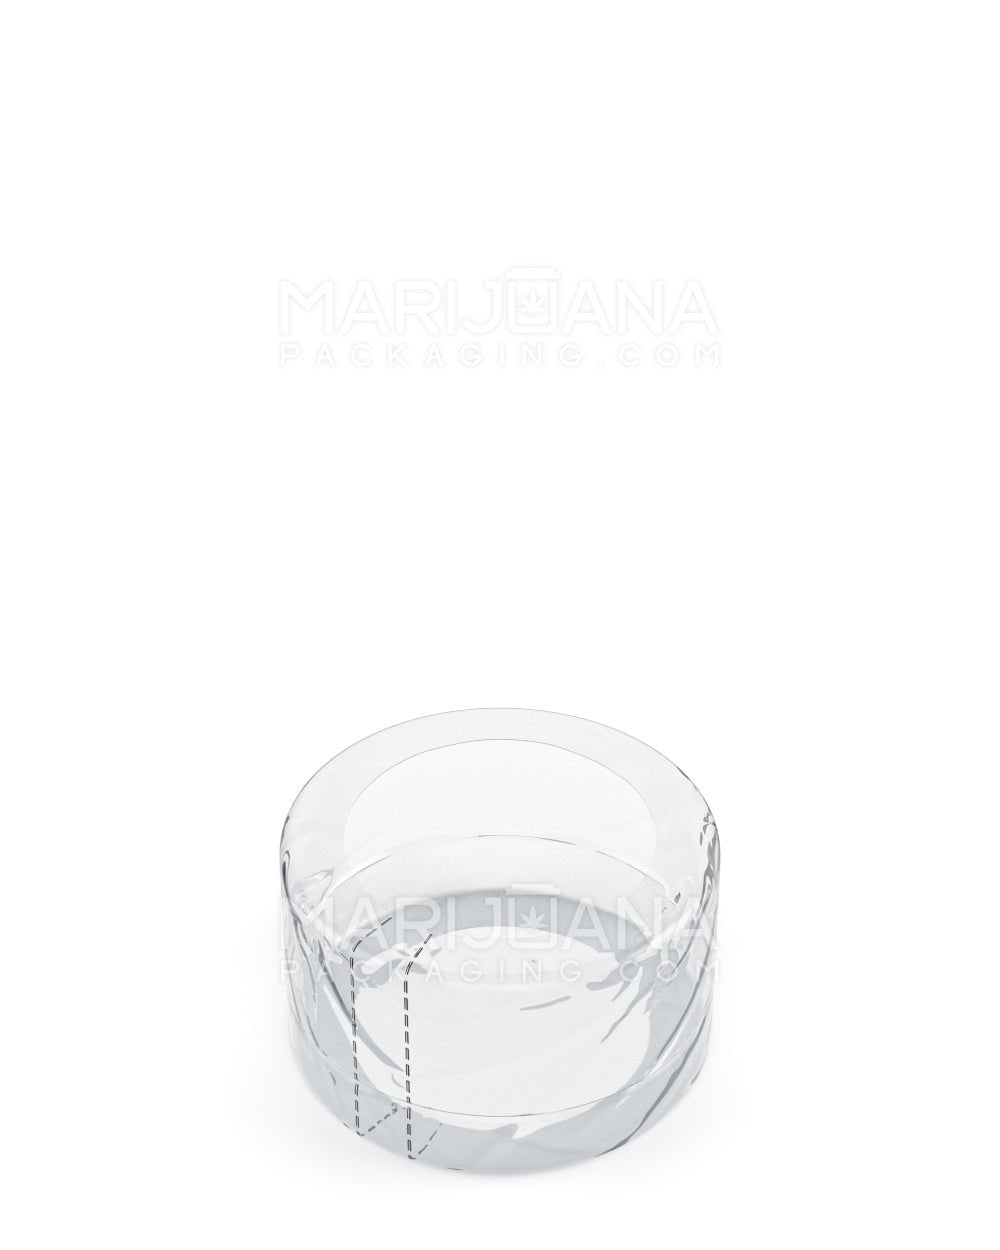 Tamper Tek 24 oz Rectangle Clear Plastic Container - with Lid